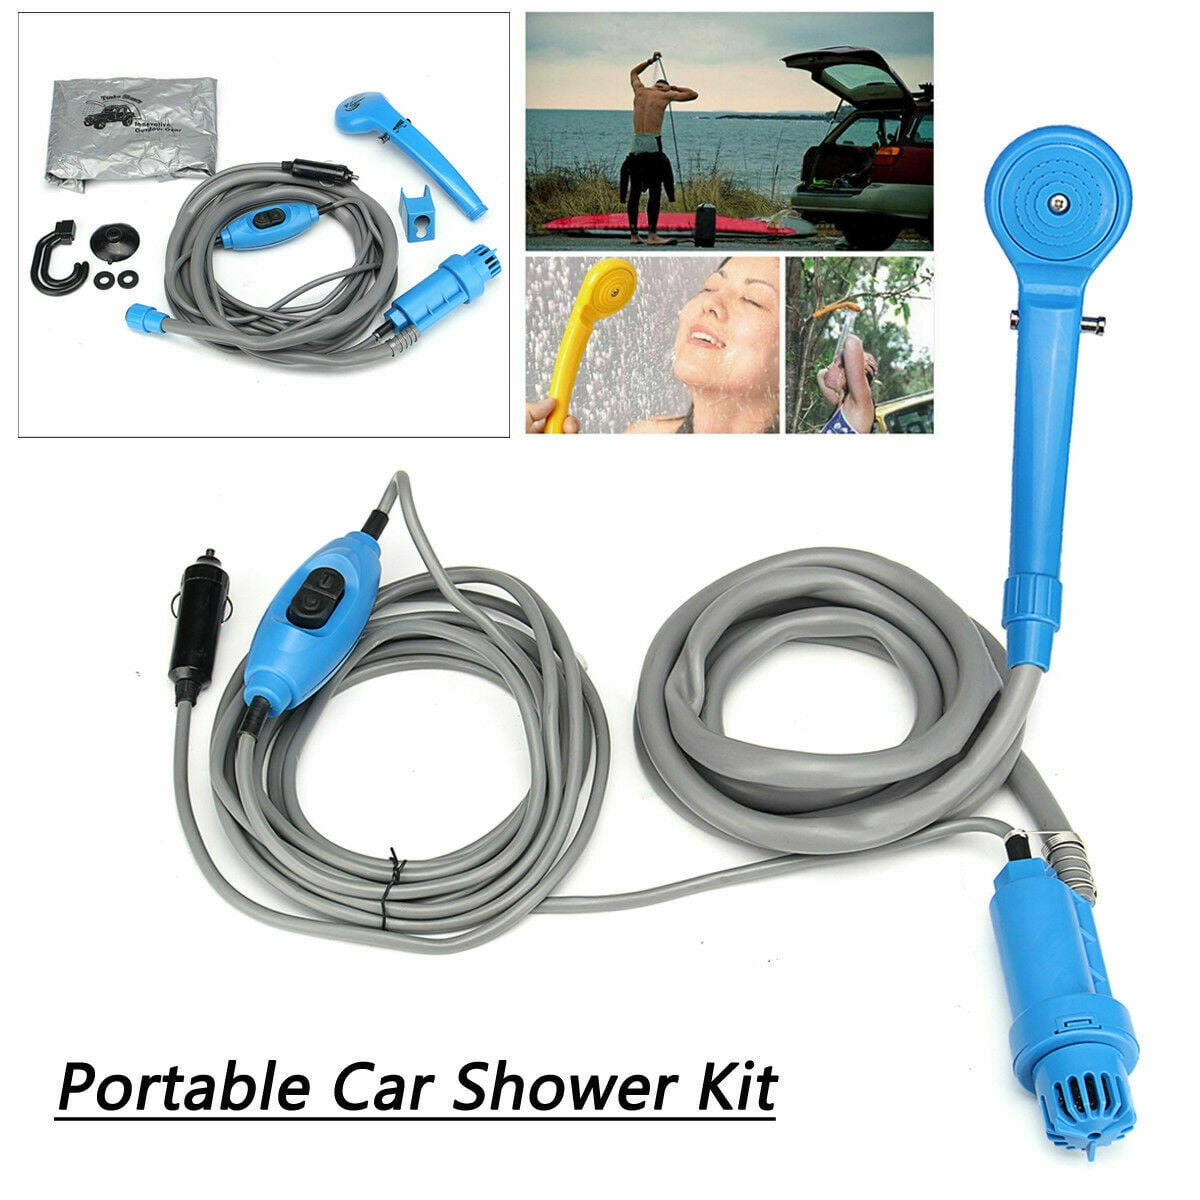 12V Camping Car Shower Spray Pump Kit Portable Vehicle Outdoor Travel Hiking New 